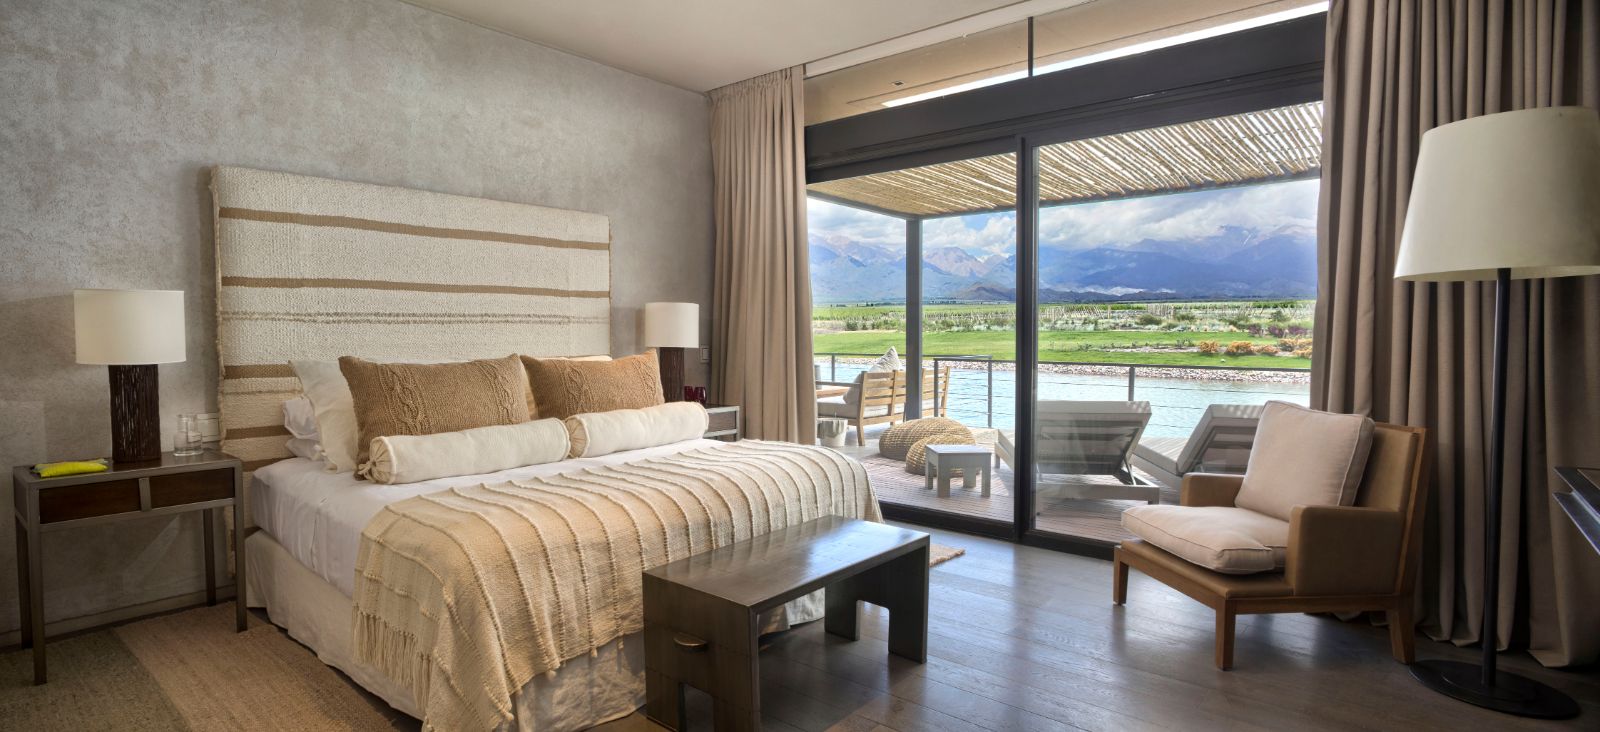 Deluxe villa bedroom with Andes views at The Vines Resort & Spa in Argentina's Uco Valley